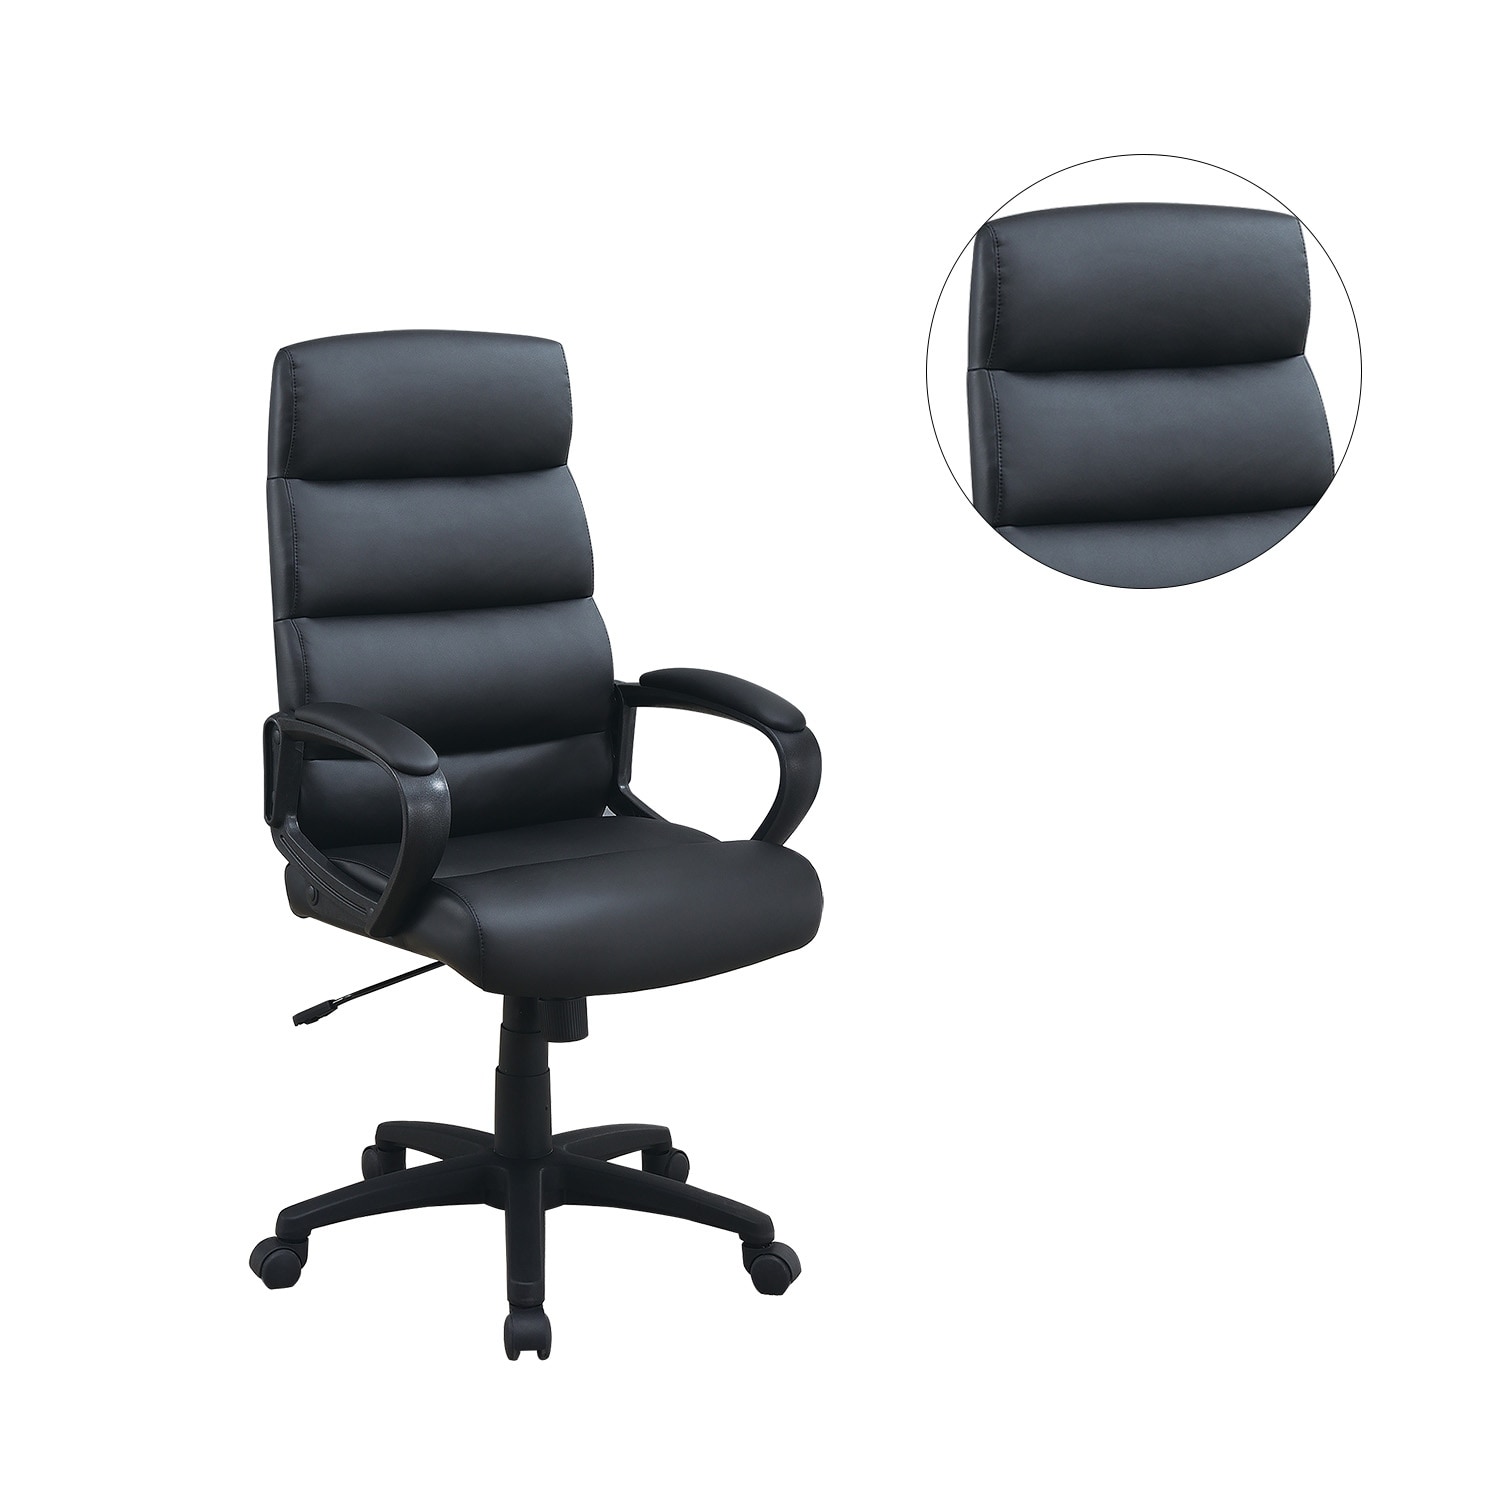 https://ak1.ostkcdn.com/images/products/is/images/direct/6fbd9c8fa90958c87fa053b54cf83faa042e829e/Executive-Office-Desk-Chair-High-Back-Adjustable-Height-Rolling-Task-Chair%2C-PU-Leather-Home-Office-Chairs-with-Lumbar-Support.jpg